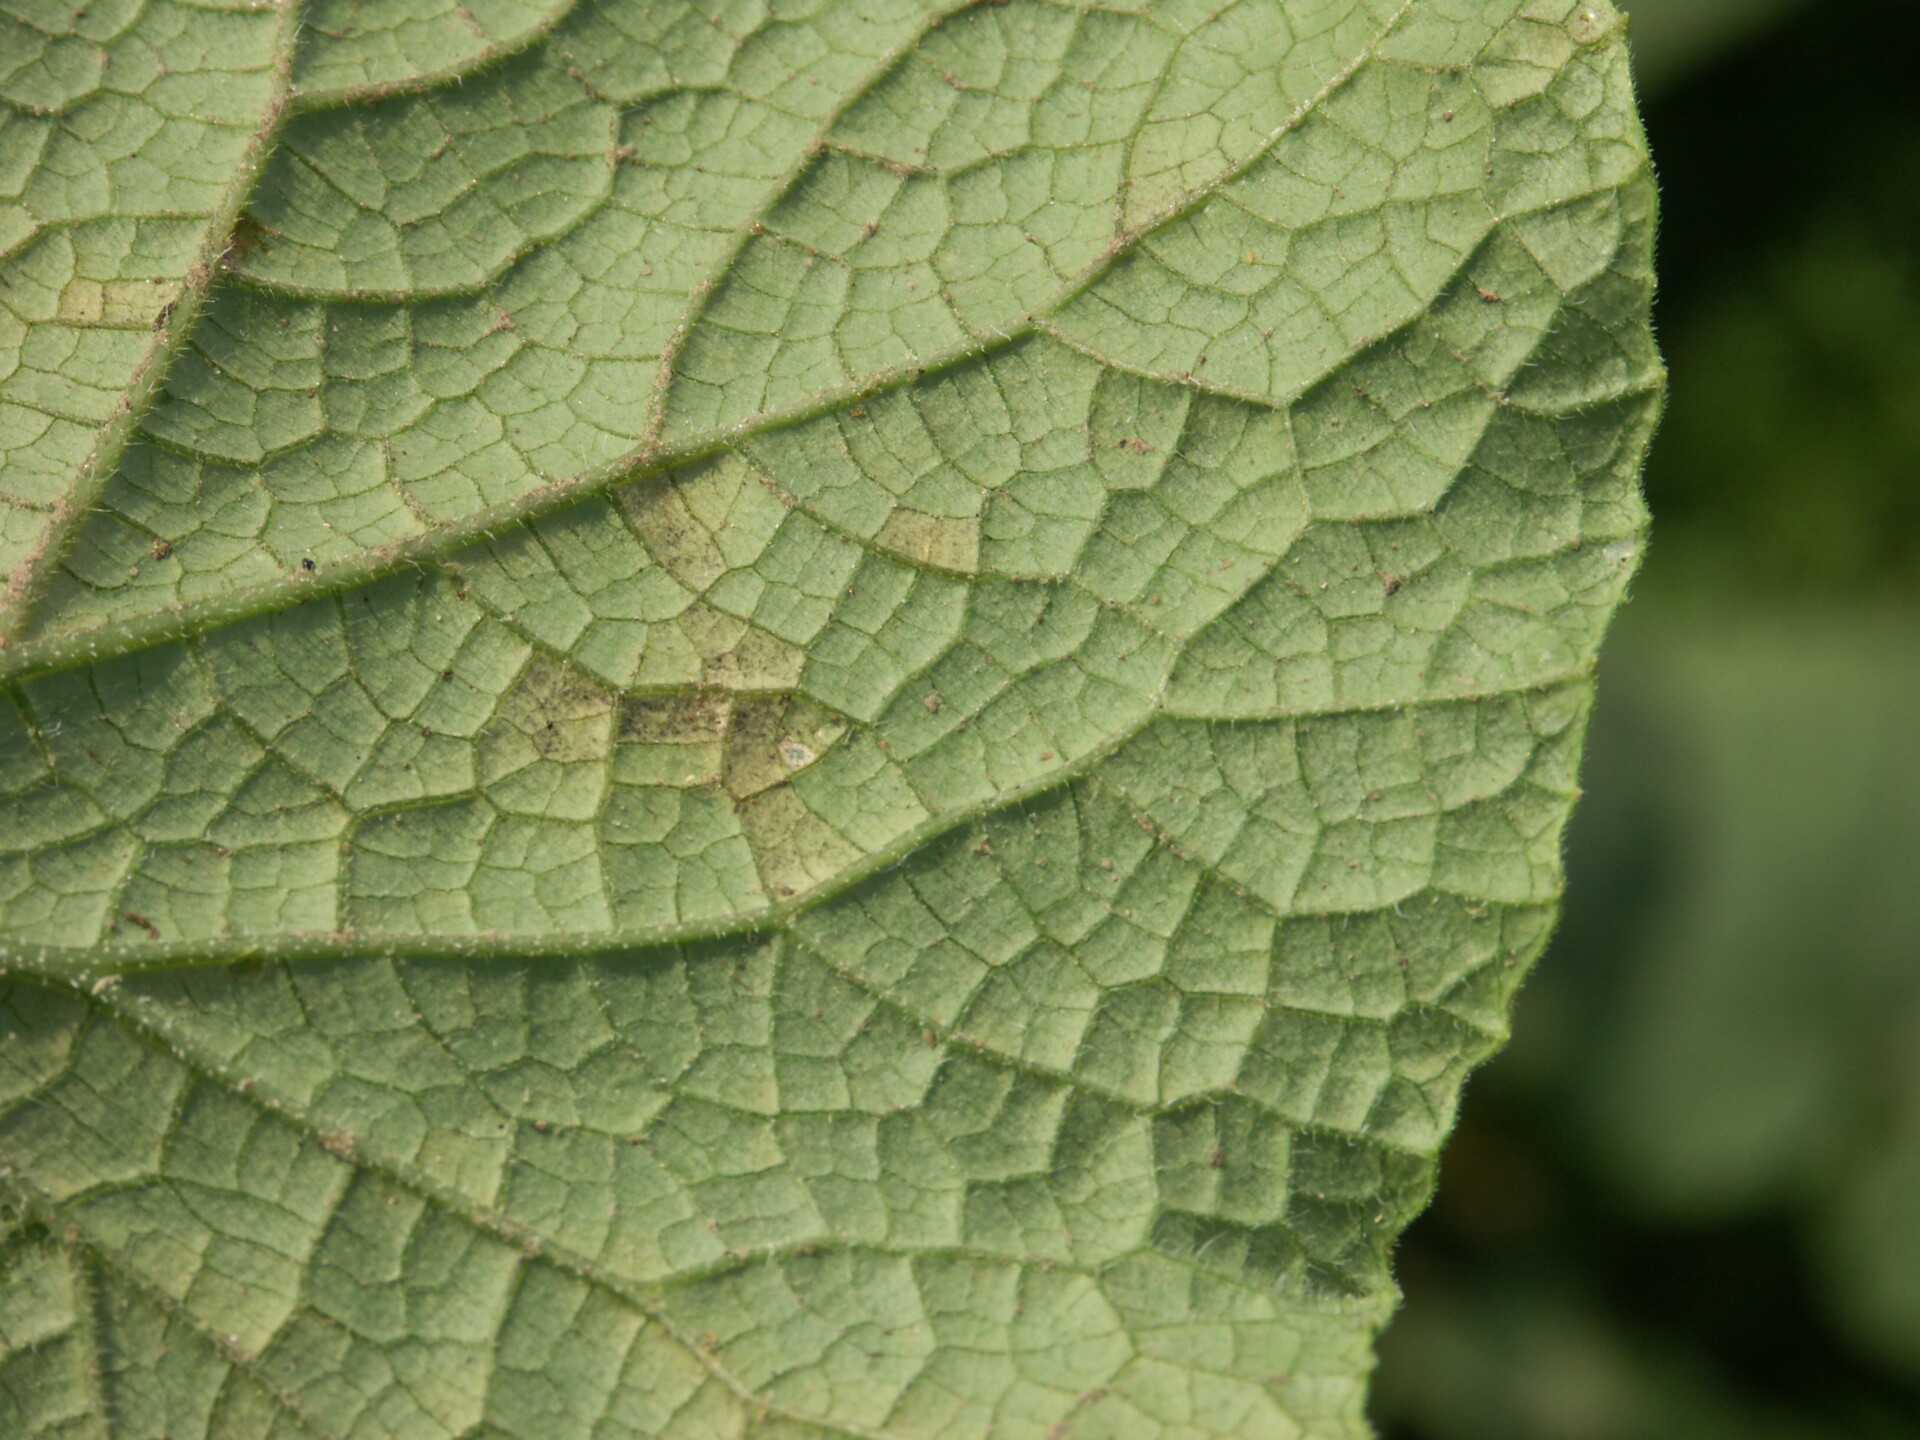 Figure 4. Downy mildew of cucumber. Note dark, sporulation visible on the underside of the leaf.